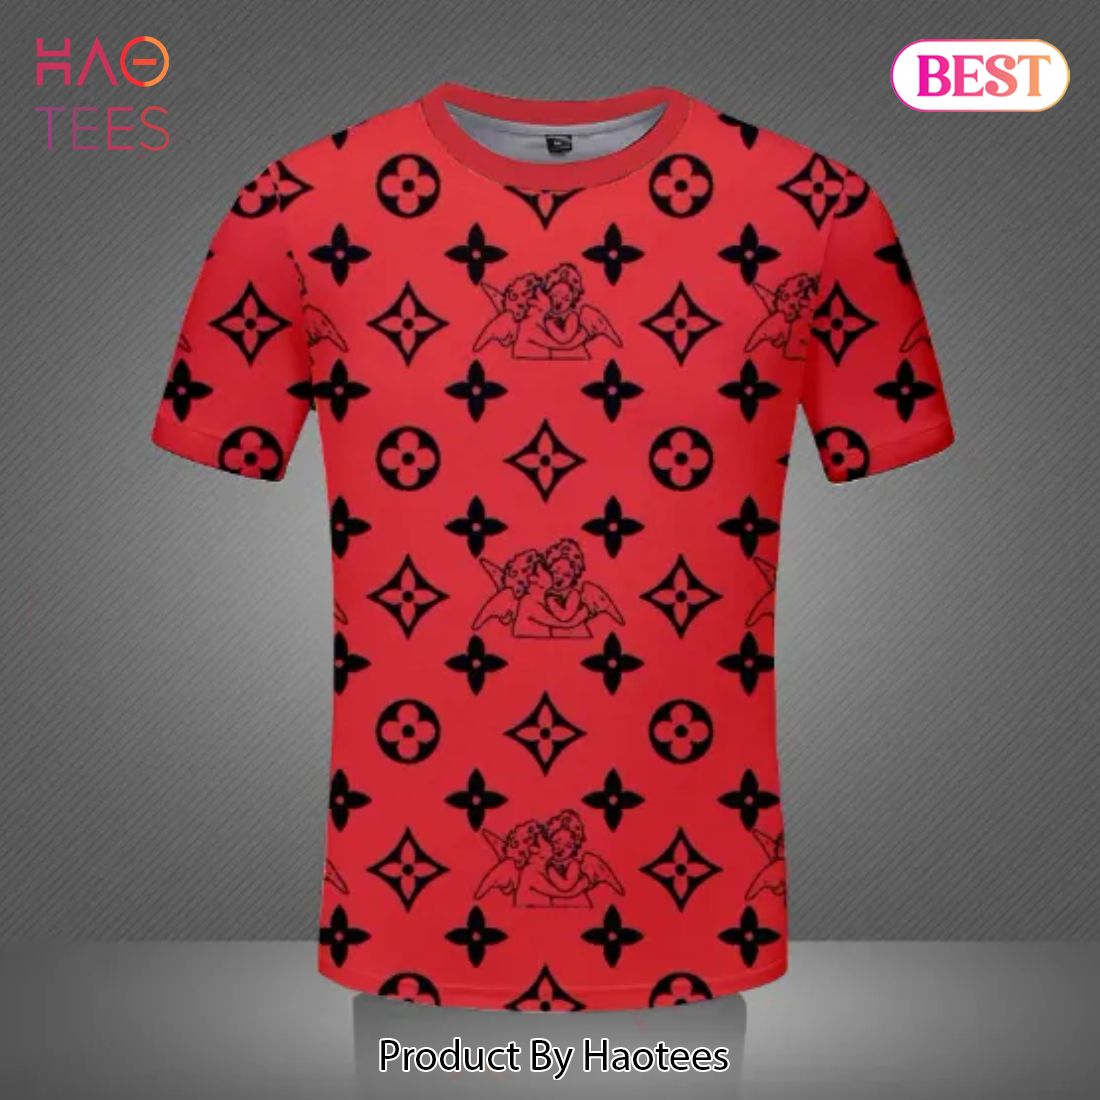 NEW FASHION] Louis Vuitton Cupid Red Luxury Brand Premium T-Shirt Outfit  For Men Women